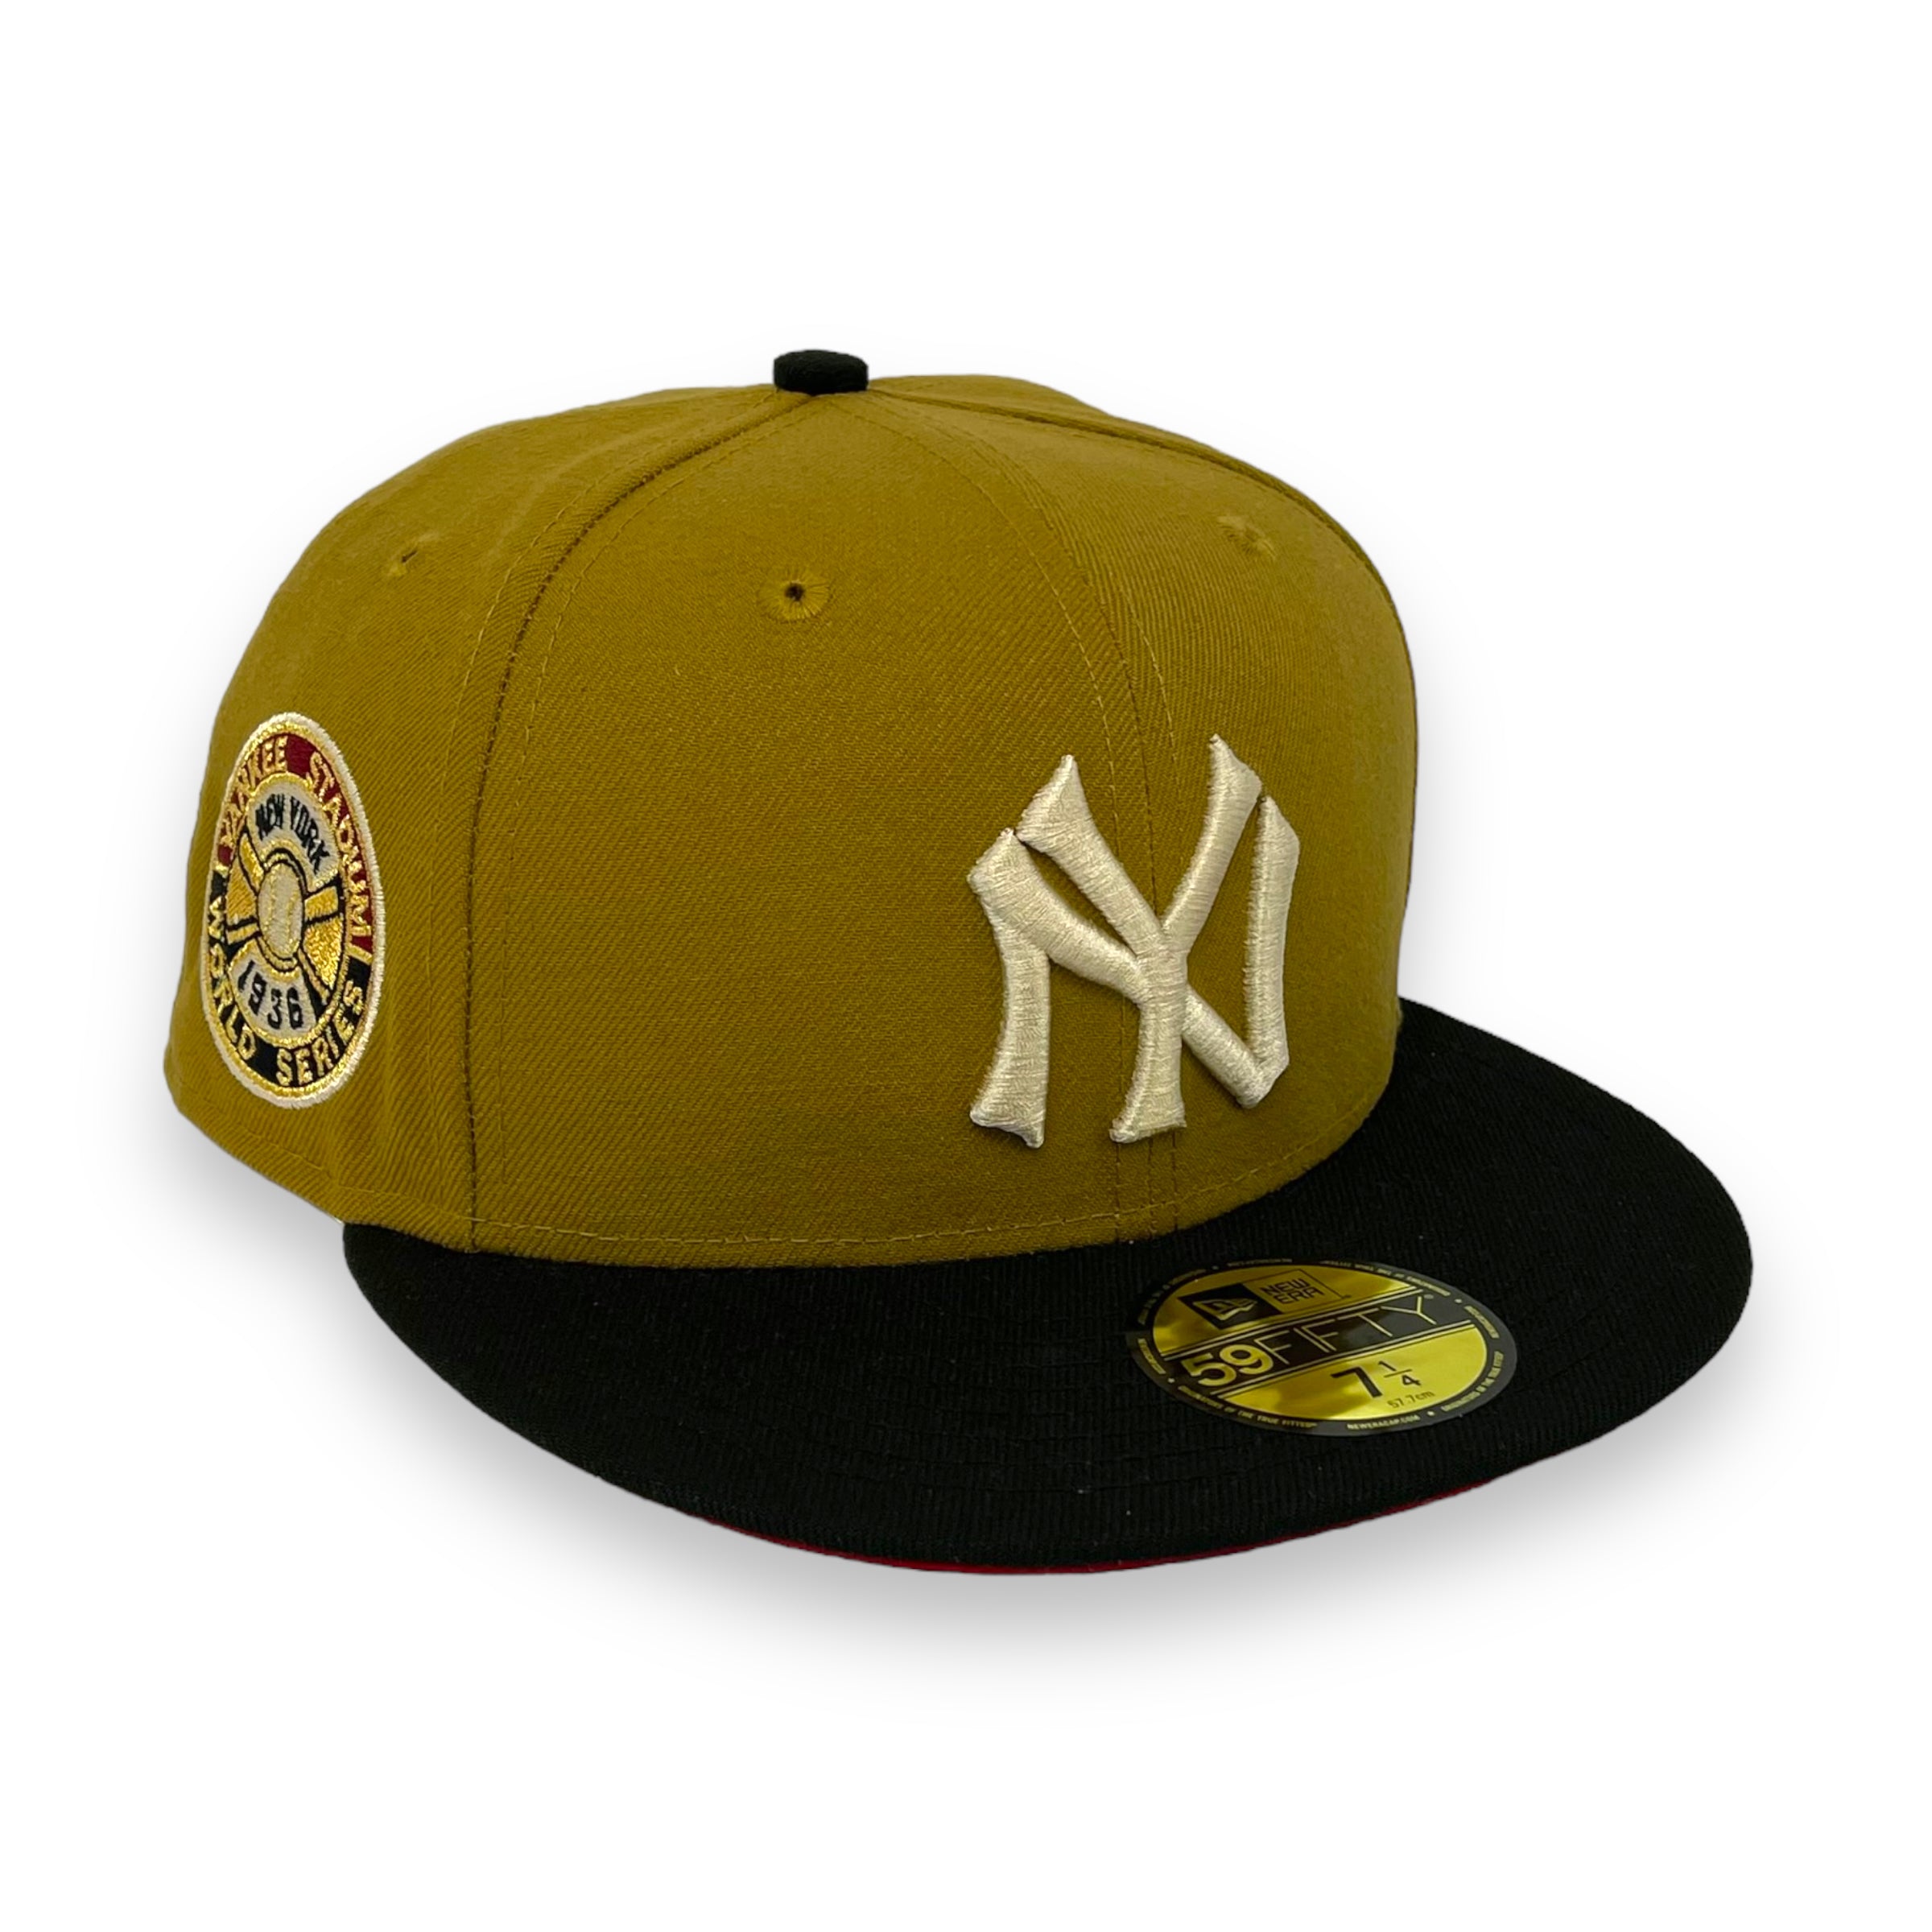 NEW YORK YANKEES (OLD GOLD) (1936 WORLD SERIES) NEW ERA 59FIFTY FITTED (RED UNDER VISOR)